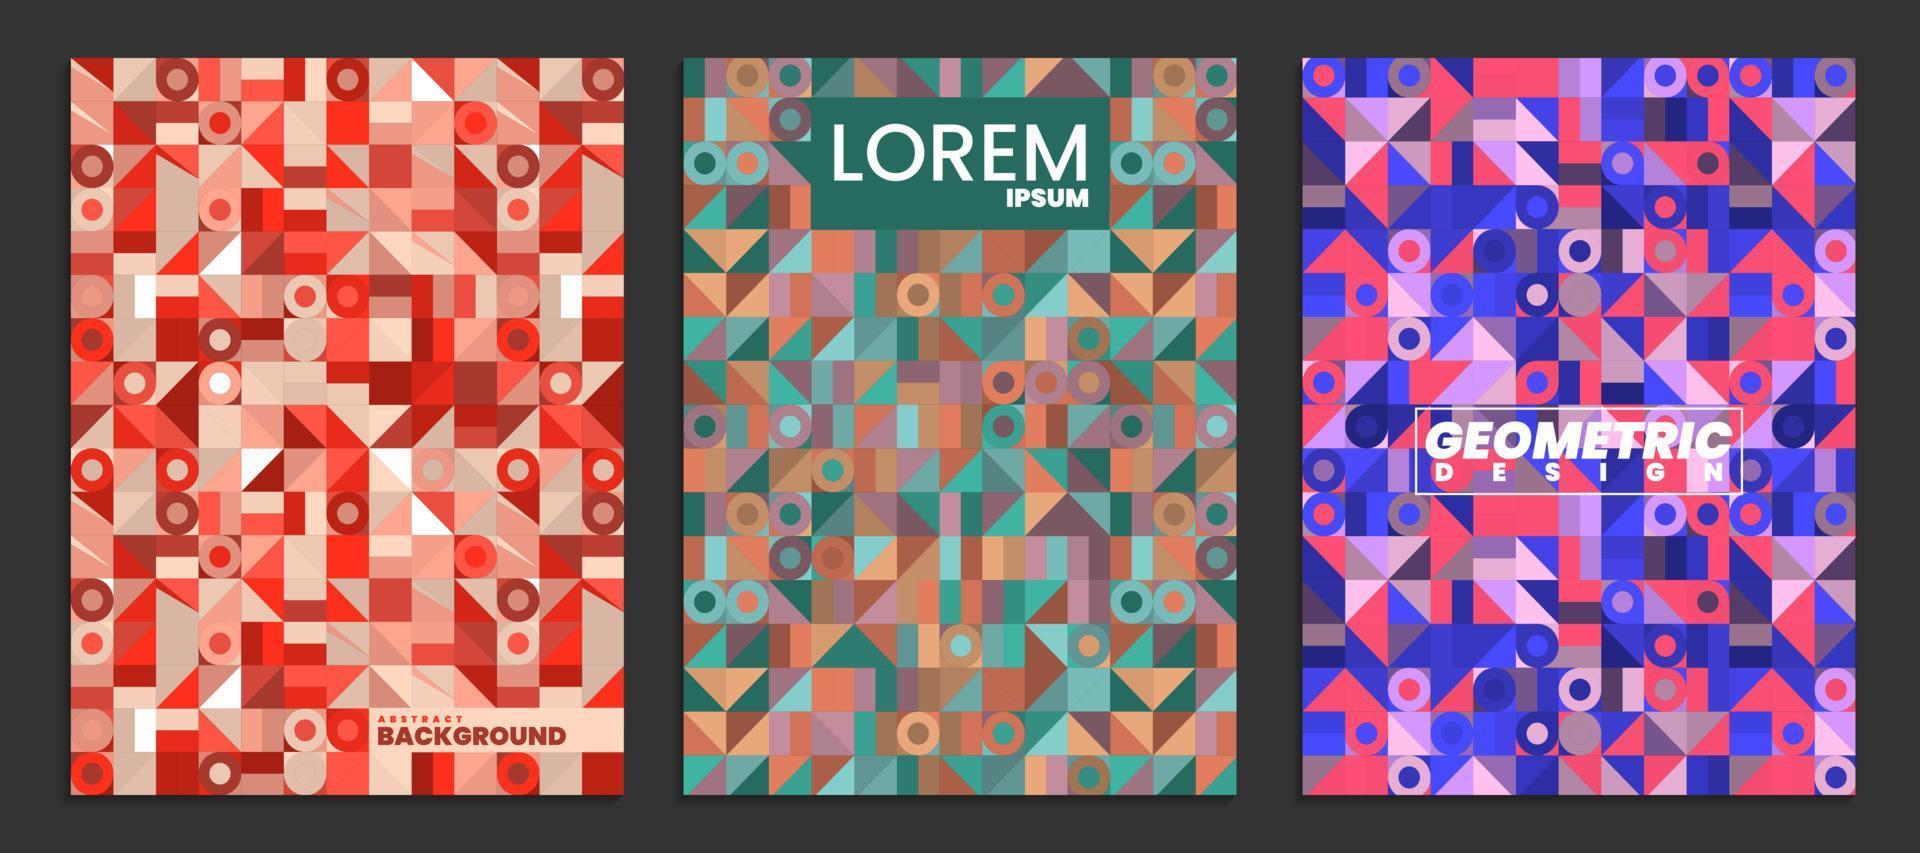 Abstract Geometric pattern background for poster cover design vector